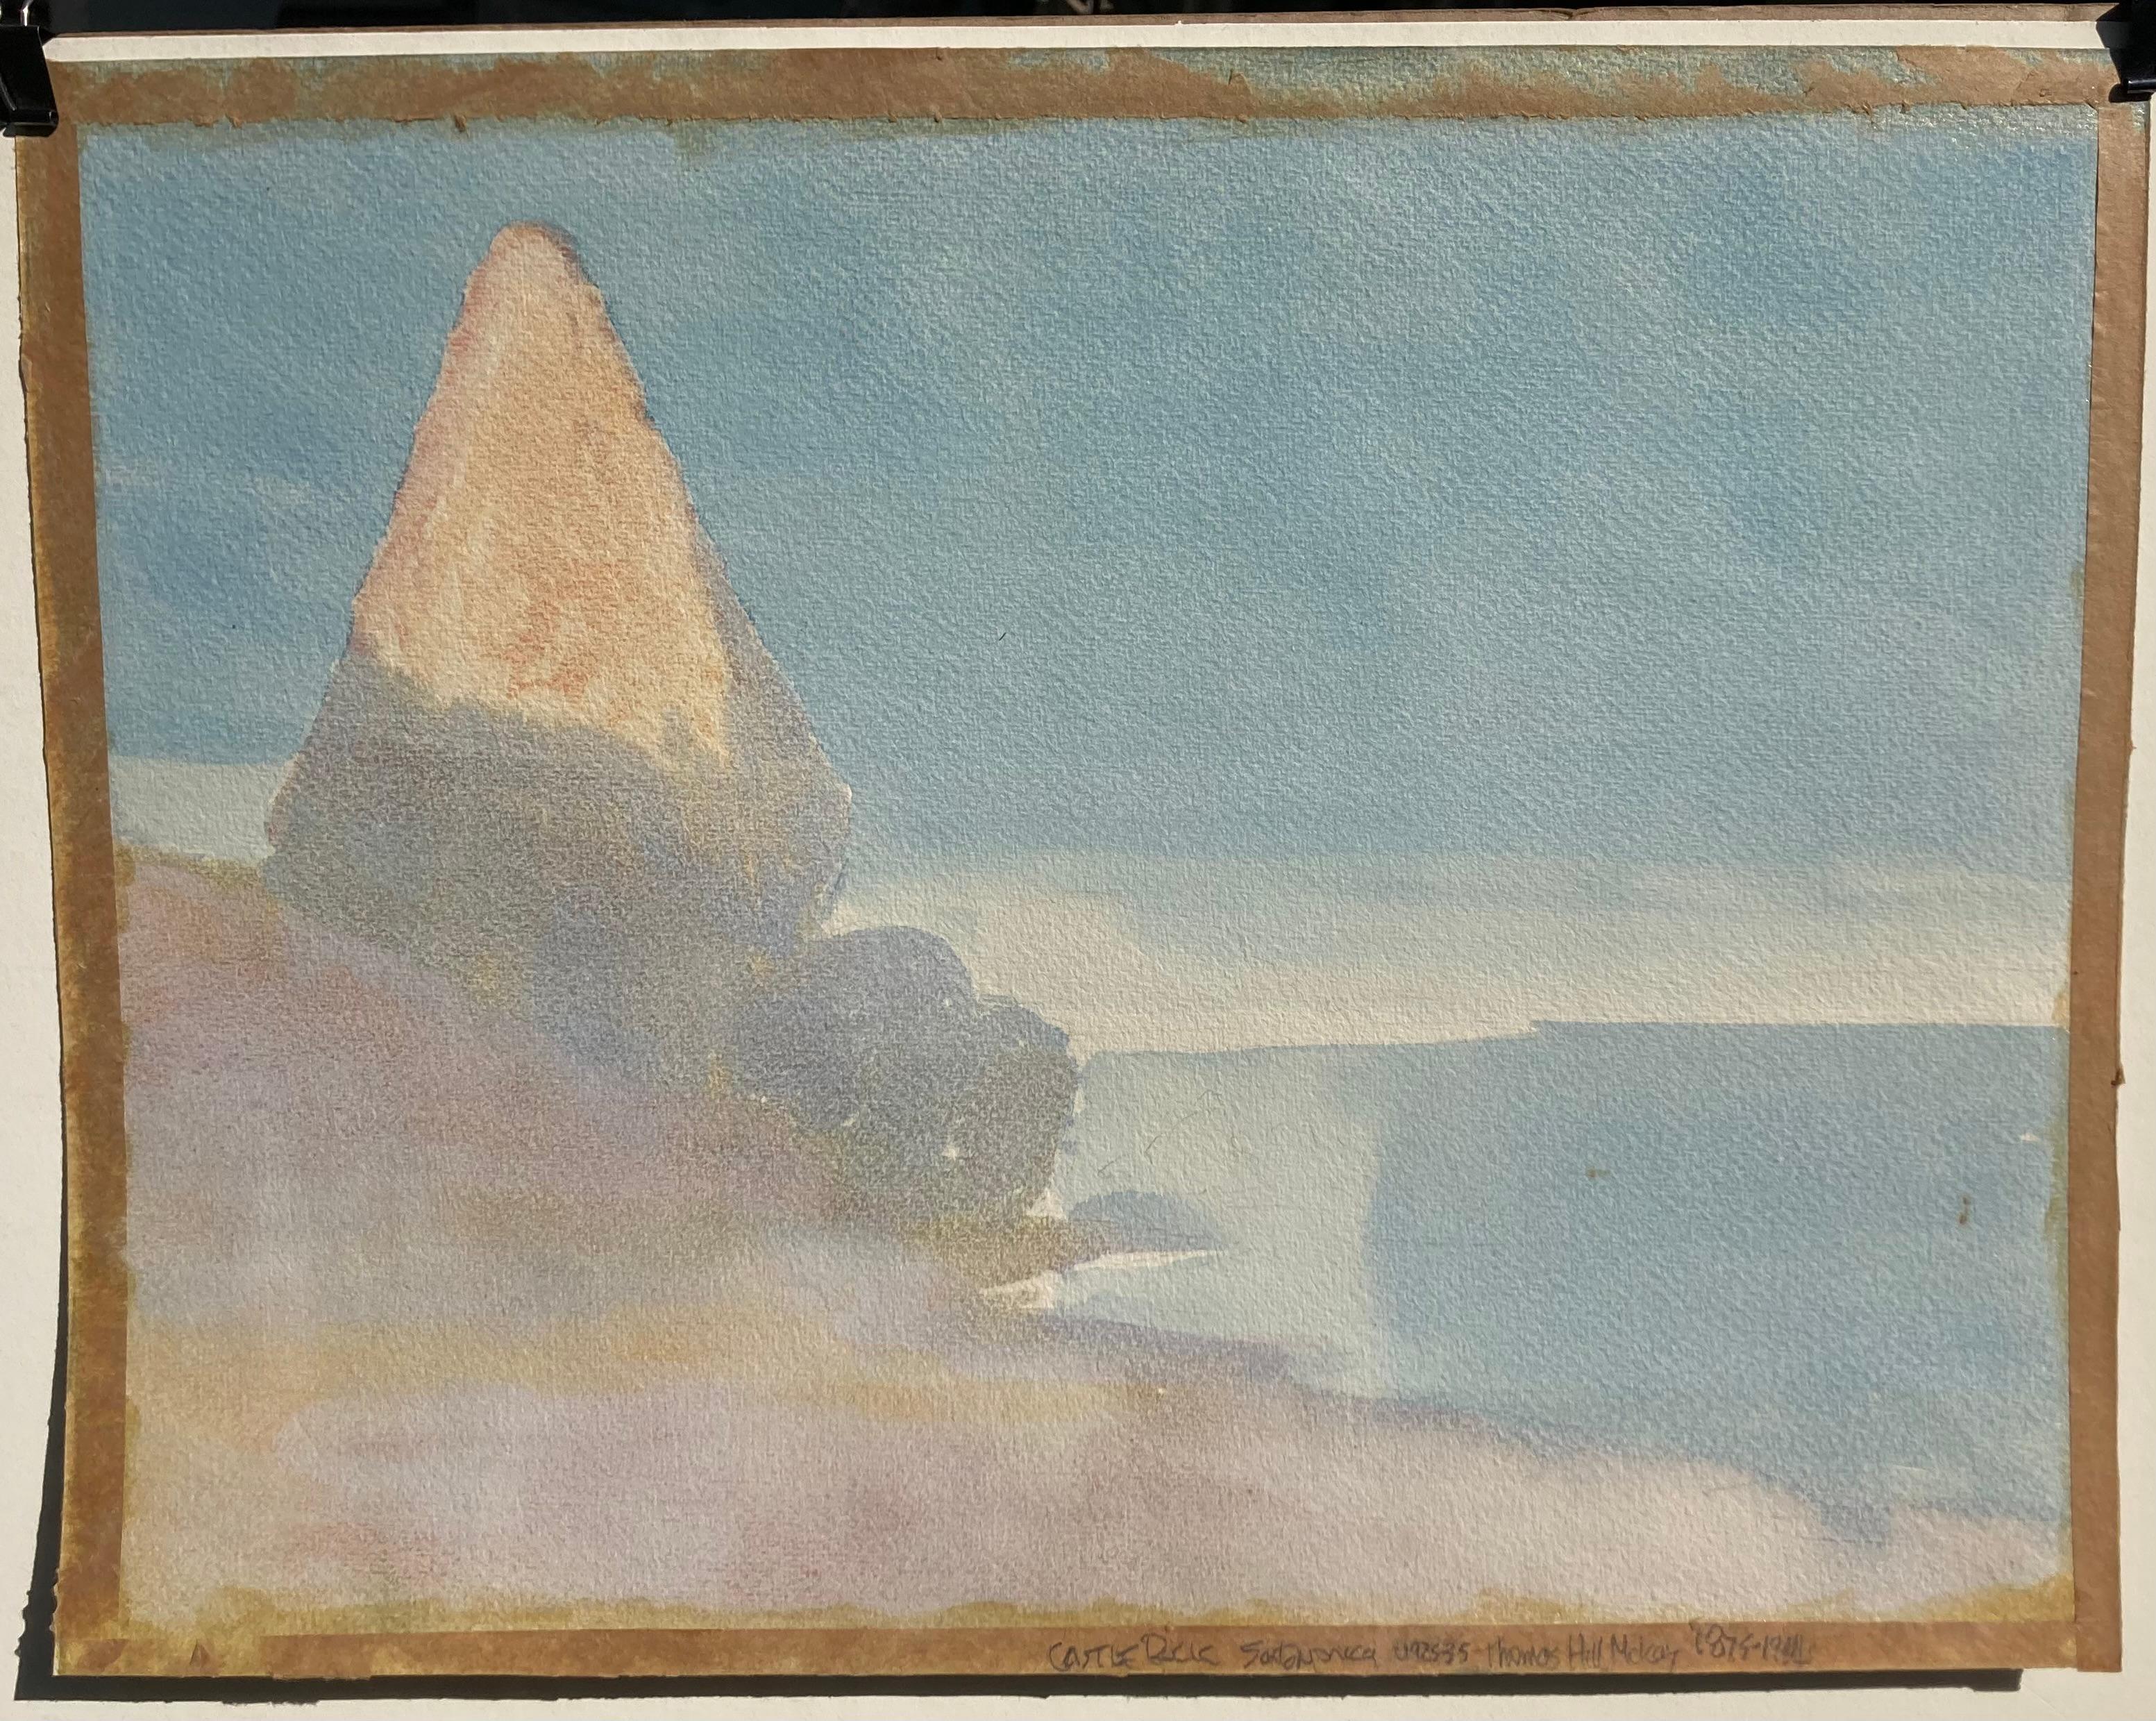 THOMAS HILL McKAY (1875-1941)

ARCH ROCK - SANTA MONICA, CA  c. 1925-30
Watercolor, signed lower right. Sheet 14 x 18 inches.. Additional full sheet study on verso.. Generally good condition save for discoloration at the sheet edges from old tape.